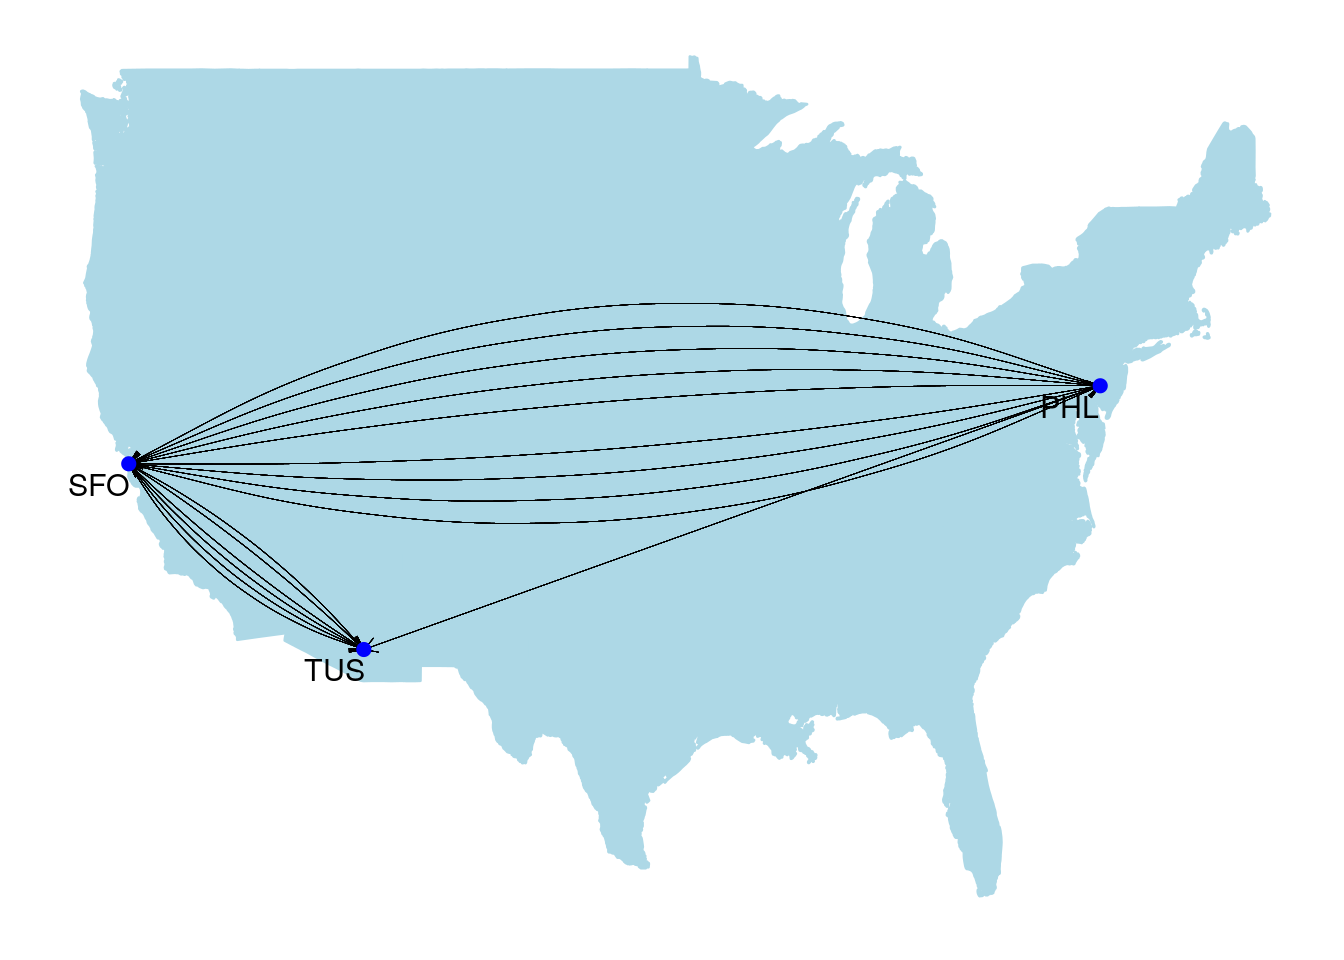 Carrier routes operating between three US airports in December 2010